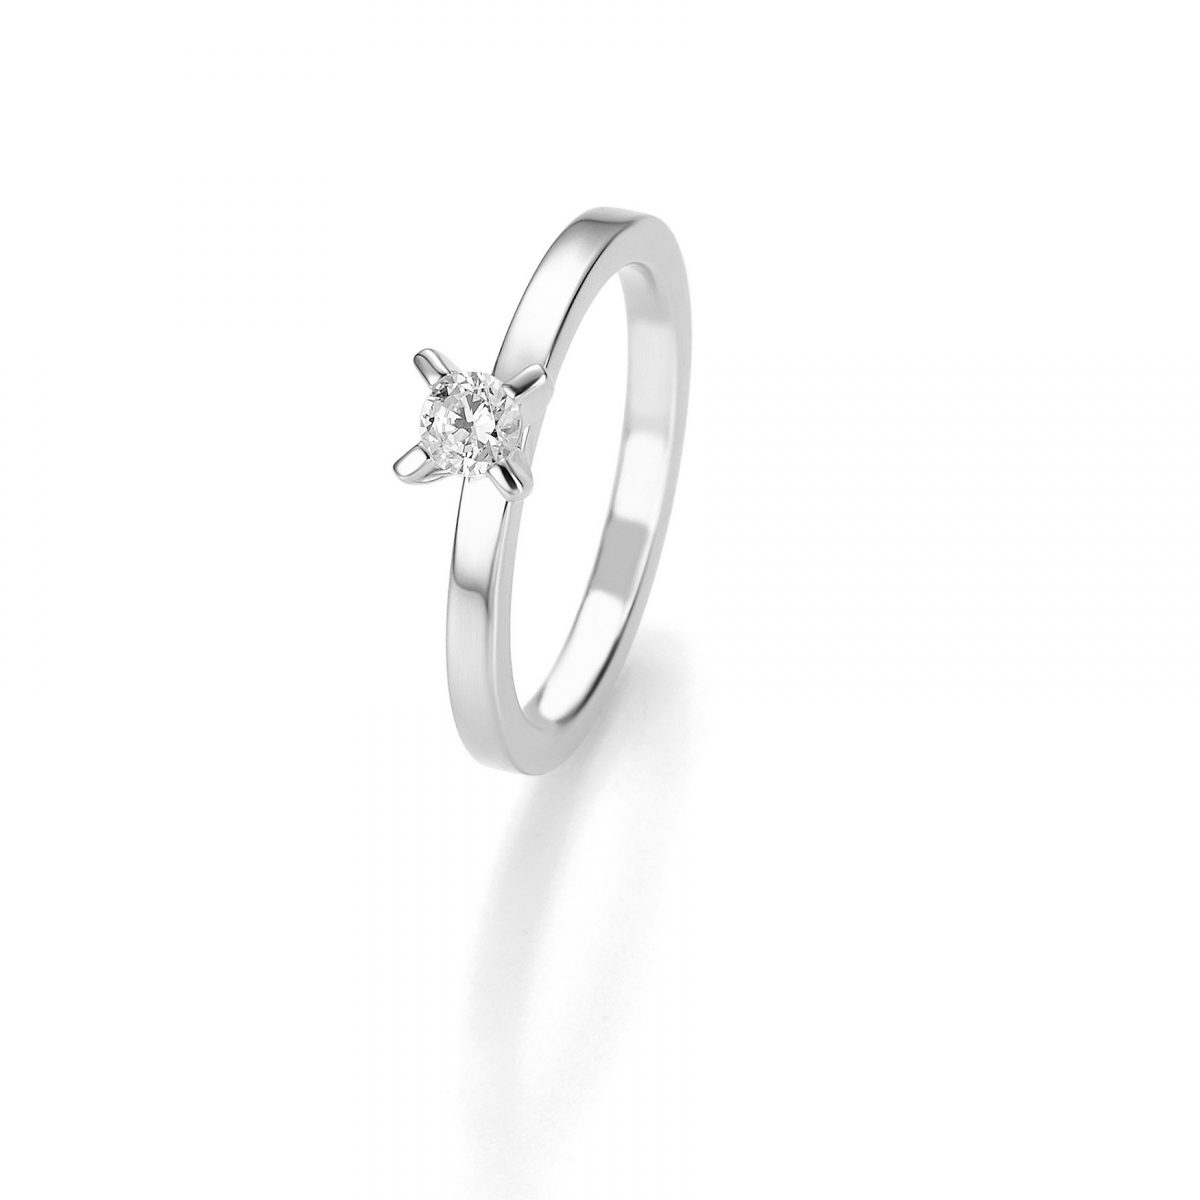 Solitaire K18 Ring with Diamond